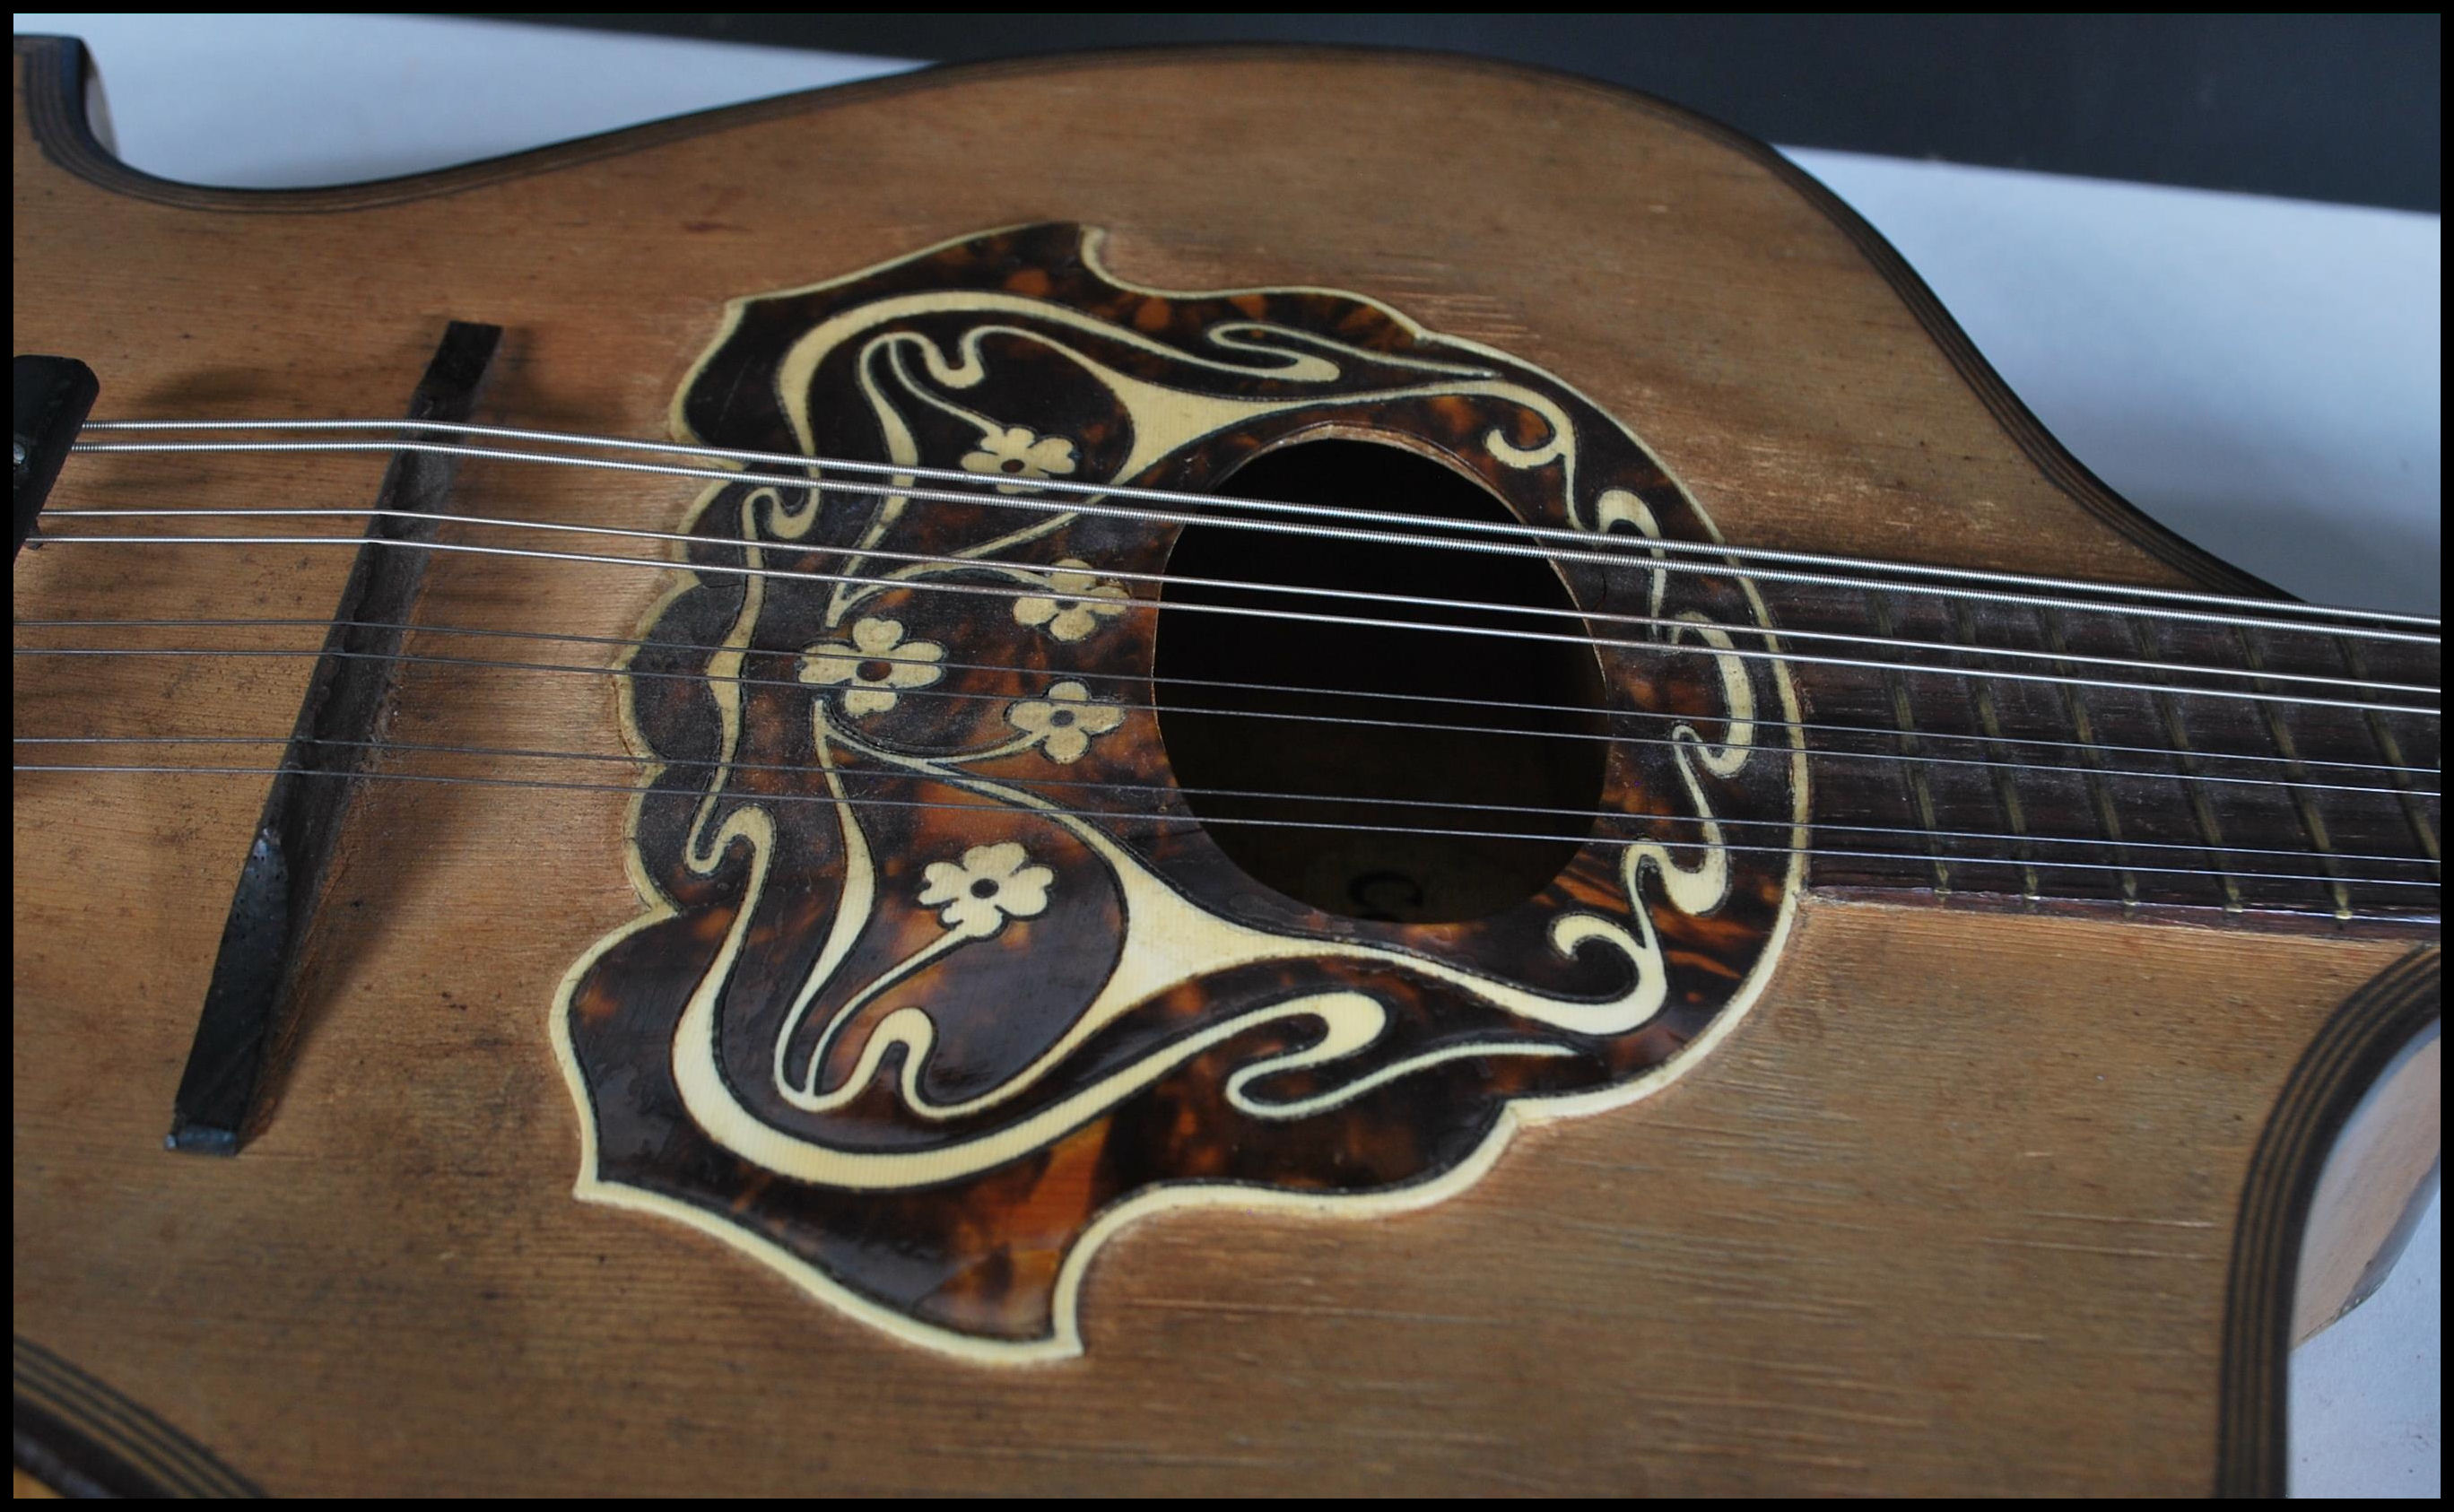 An early 20th Century Mandolin having mother of pearl inlaid fingerboard with bone and tortoiseshell - Image 5 of 7